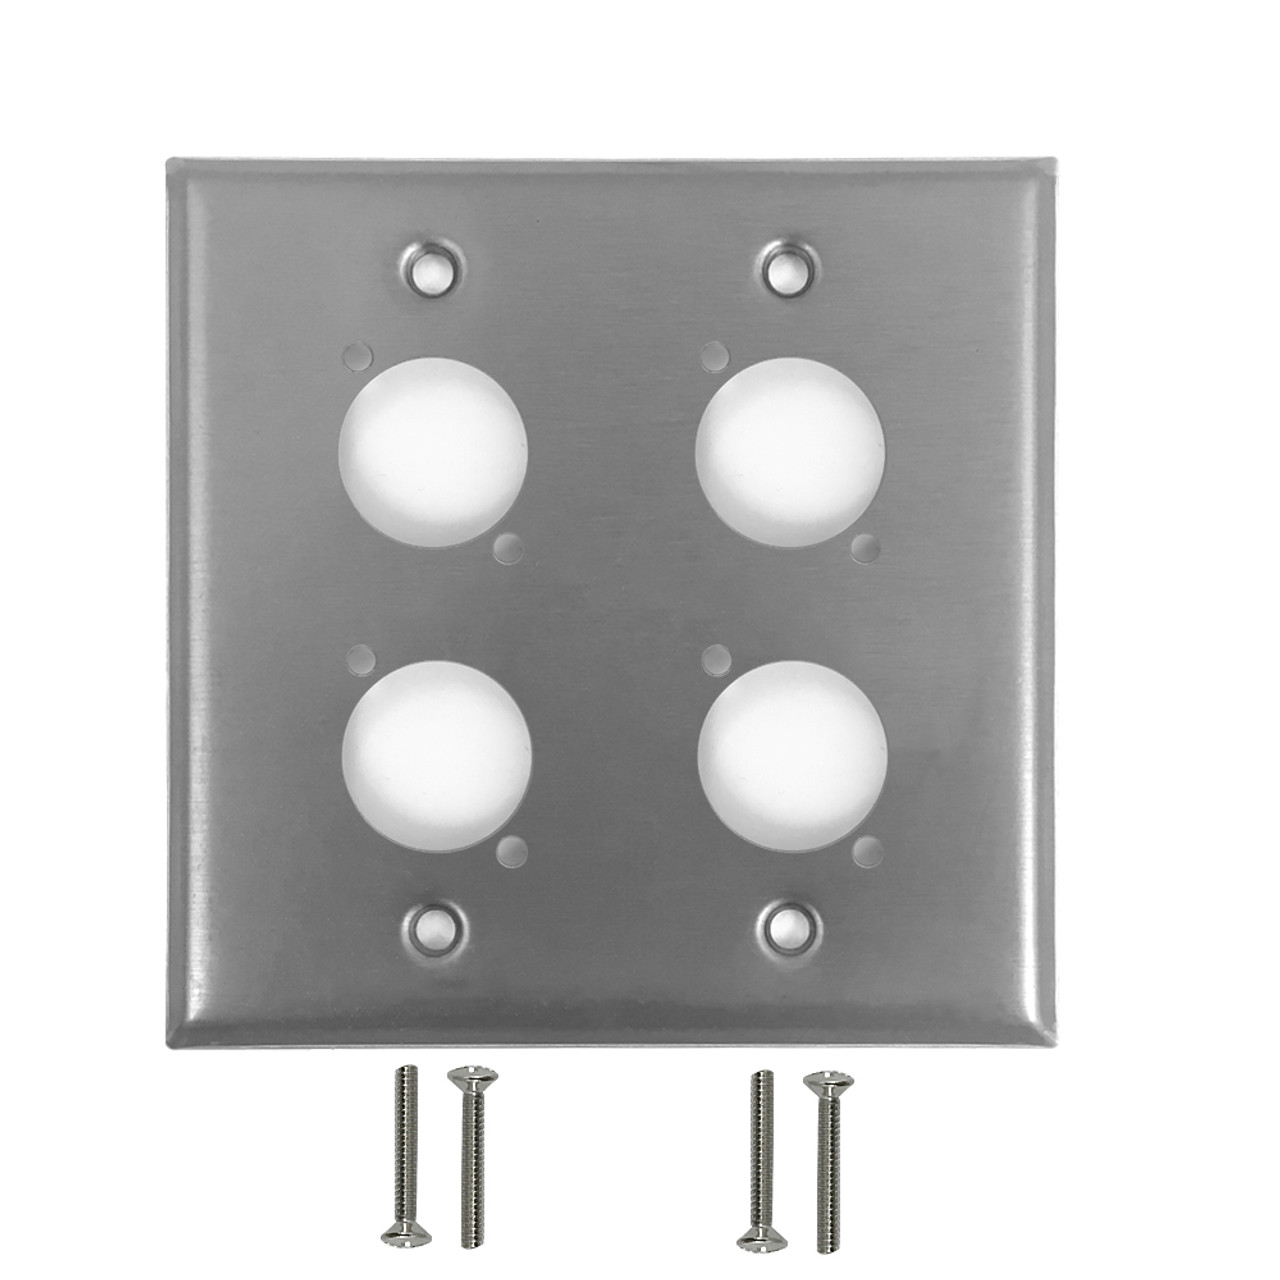 Double Gang 4 Port XLR Stainless Steel Wall Plate